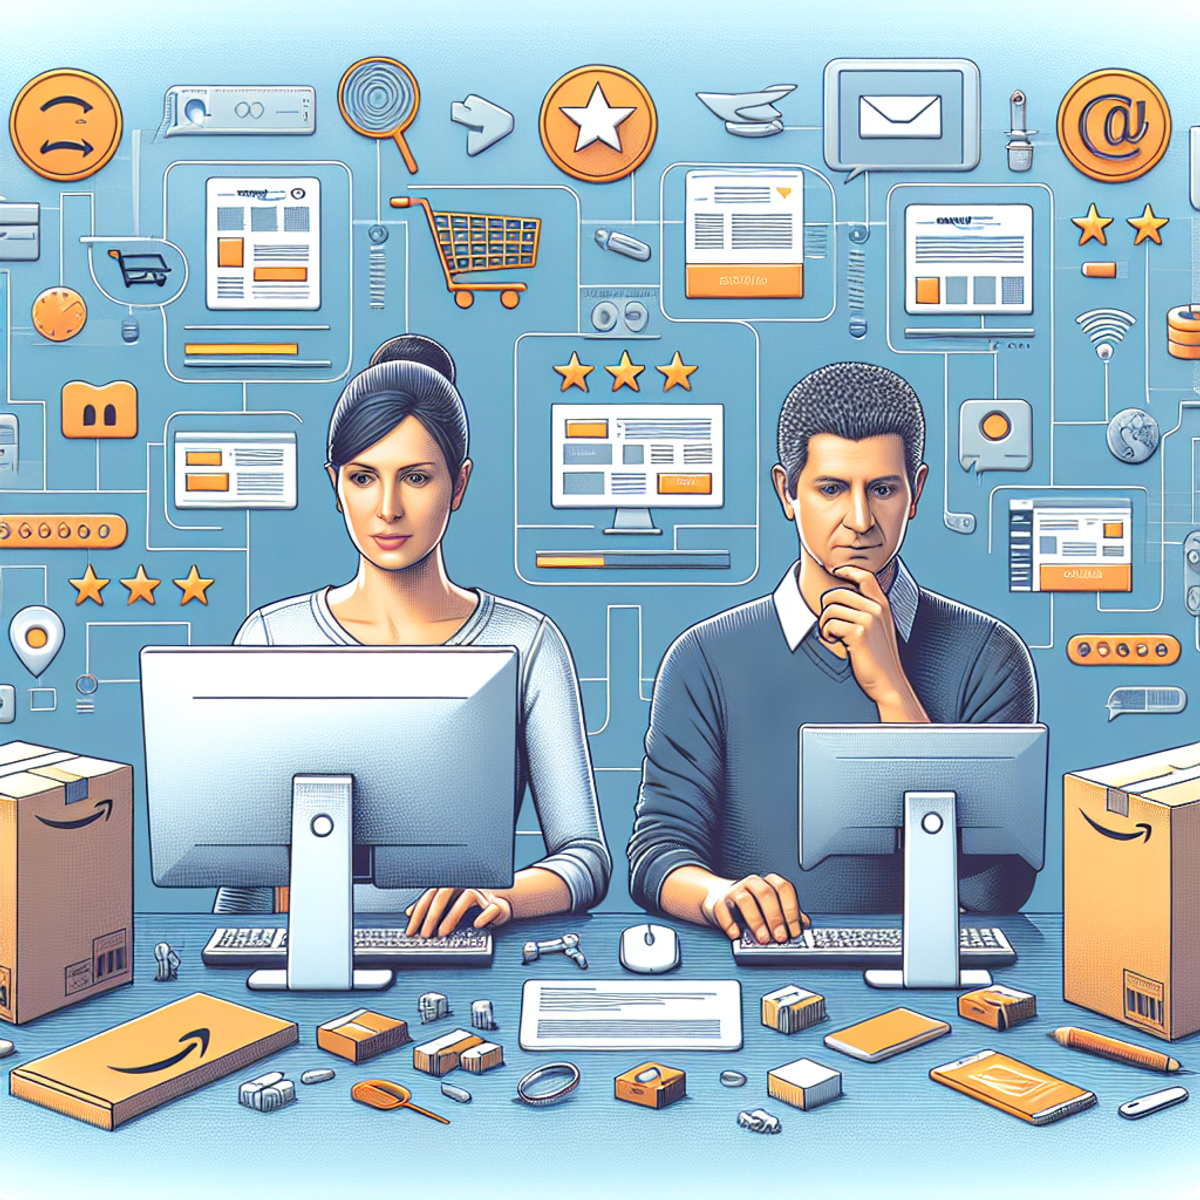 A woman and a man sit at computers surrounded by e-commerce symbols.